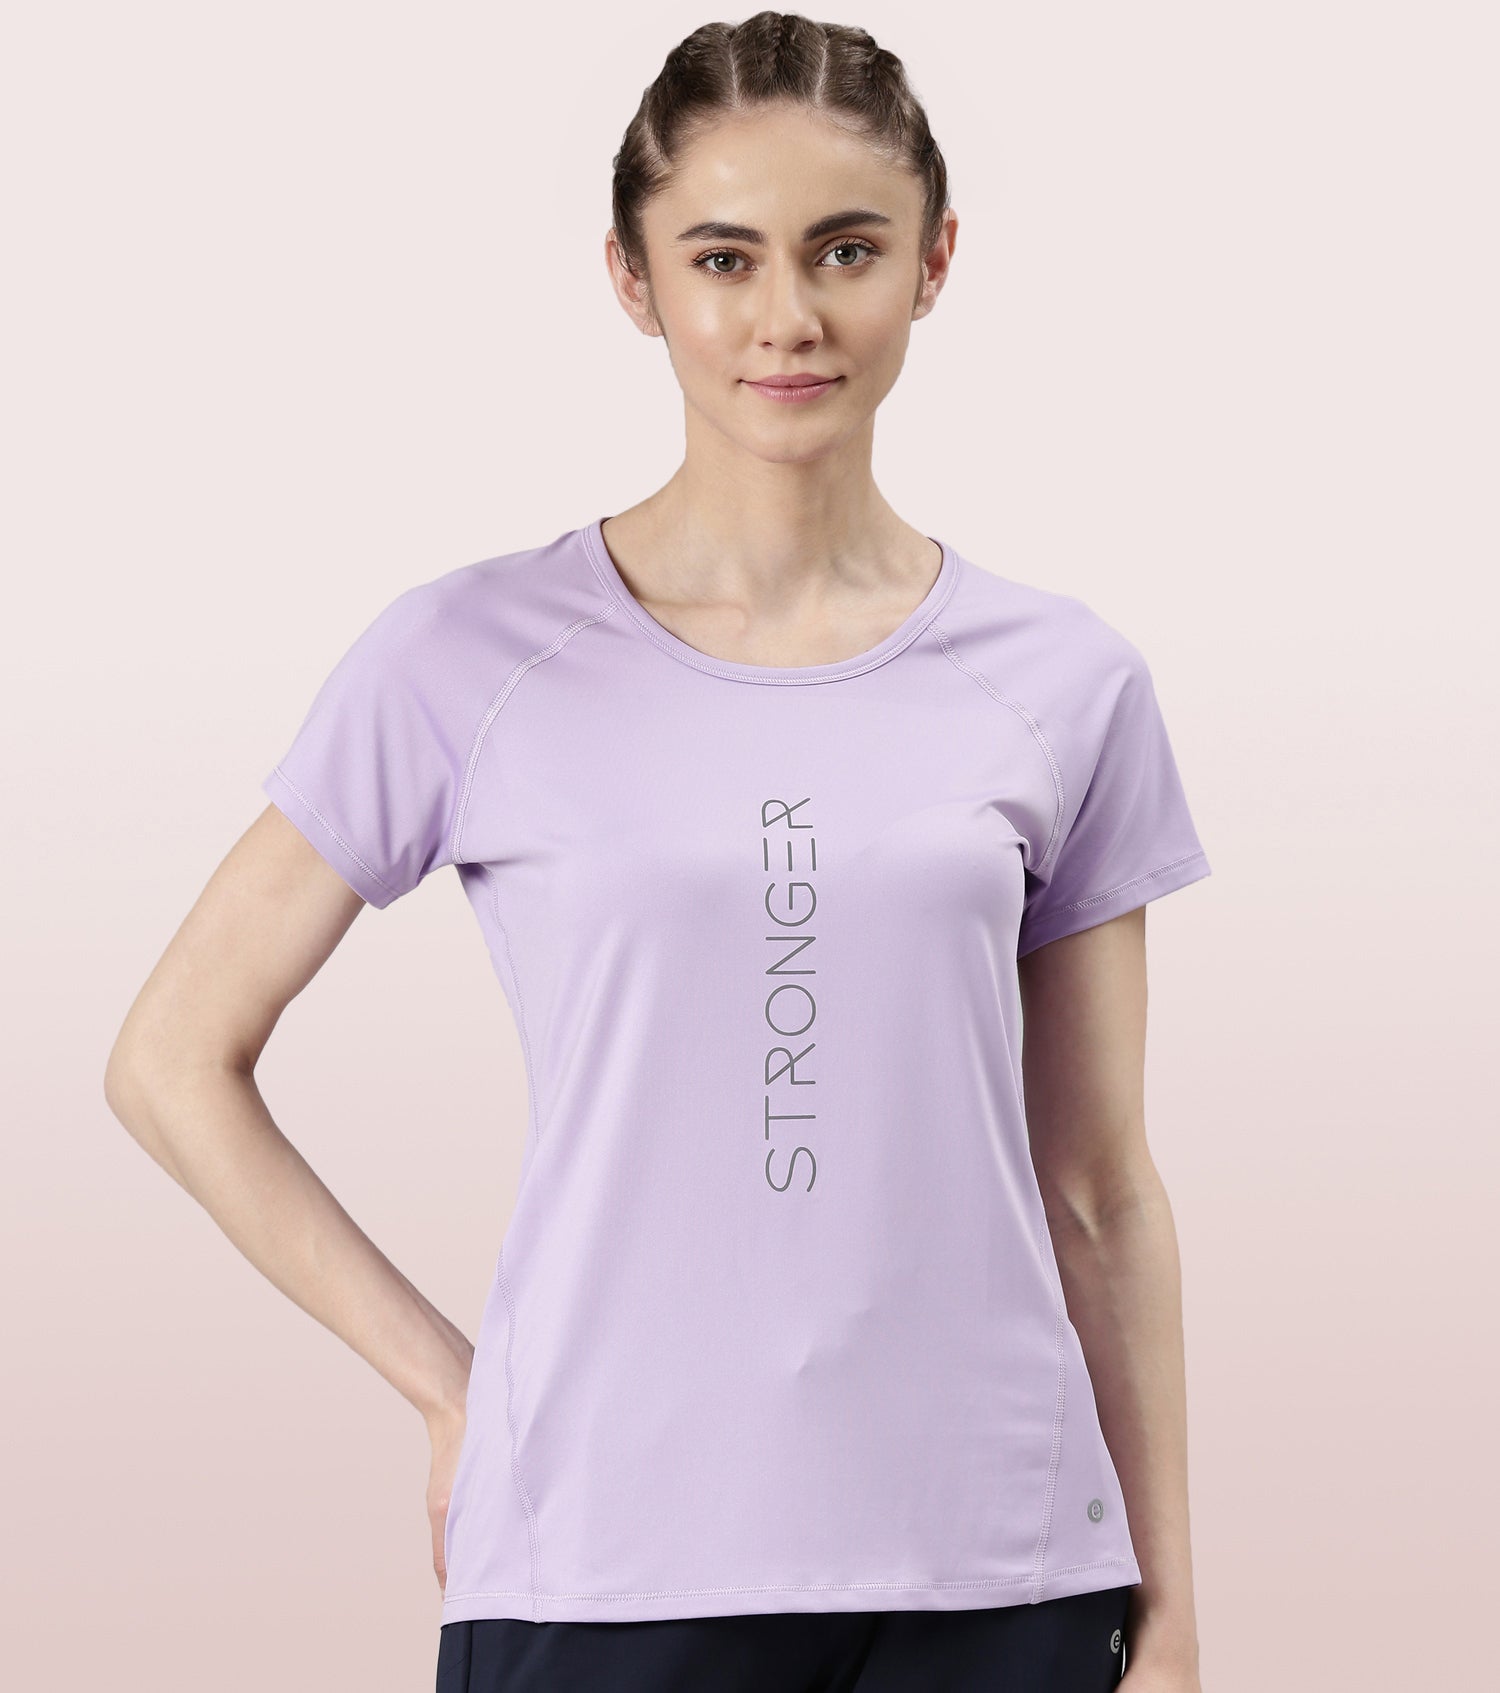 Enamor Active Dry Fit Graphic Tee For Women | Basic T-Shirt With Raglan Sleeve & Scoop Neck Design | Mauve Love - Fearless Graphic